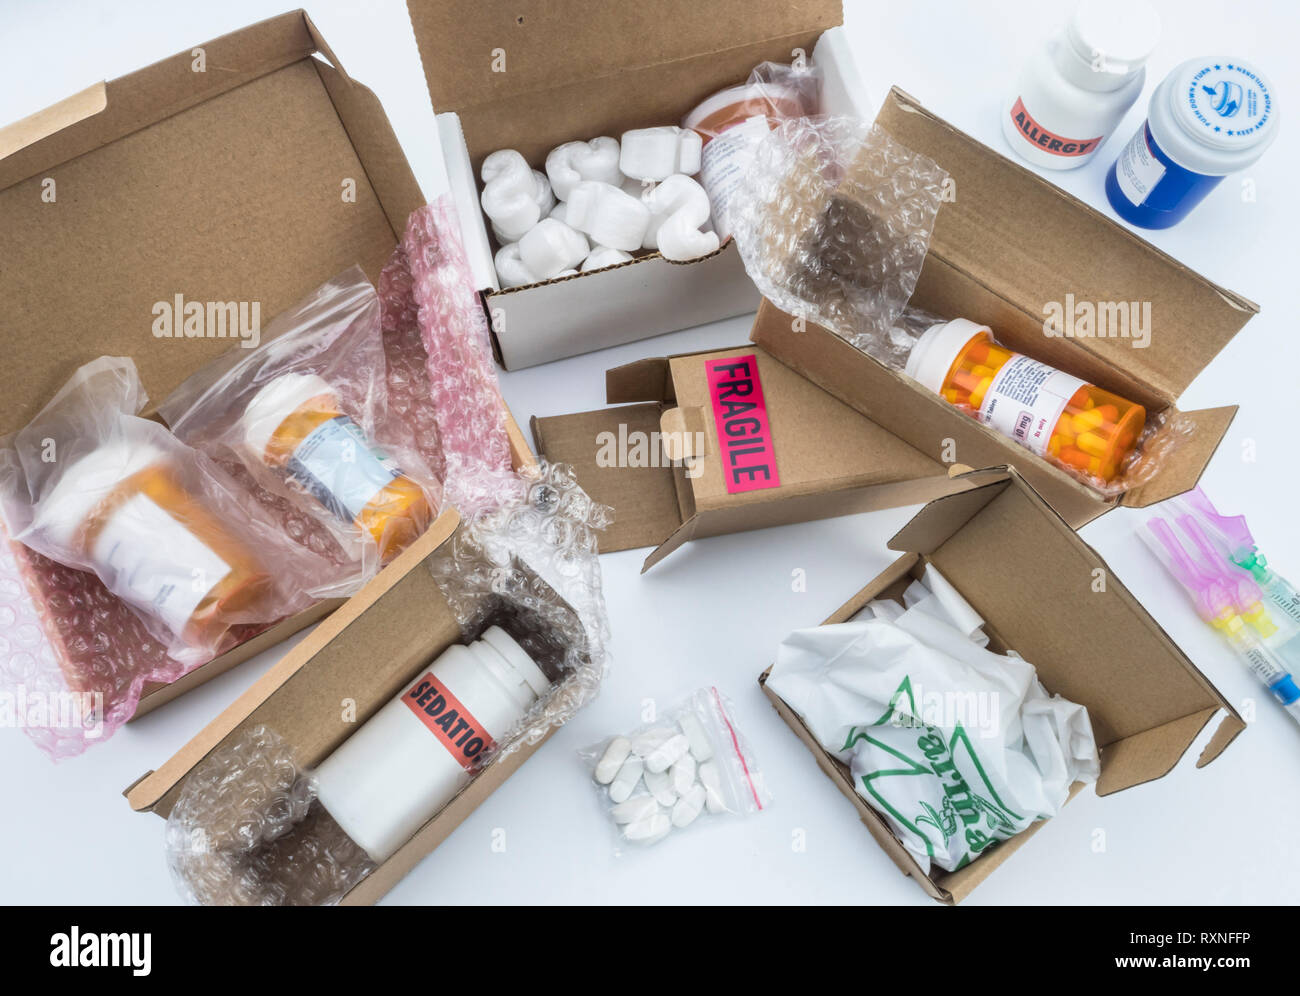 unpacking medication in boxes, Diverse medicines in boxes for humanitarian aid, conceptual image Stock Photo